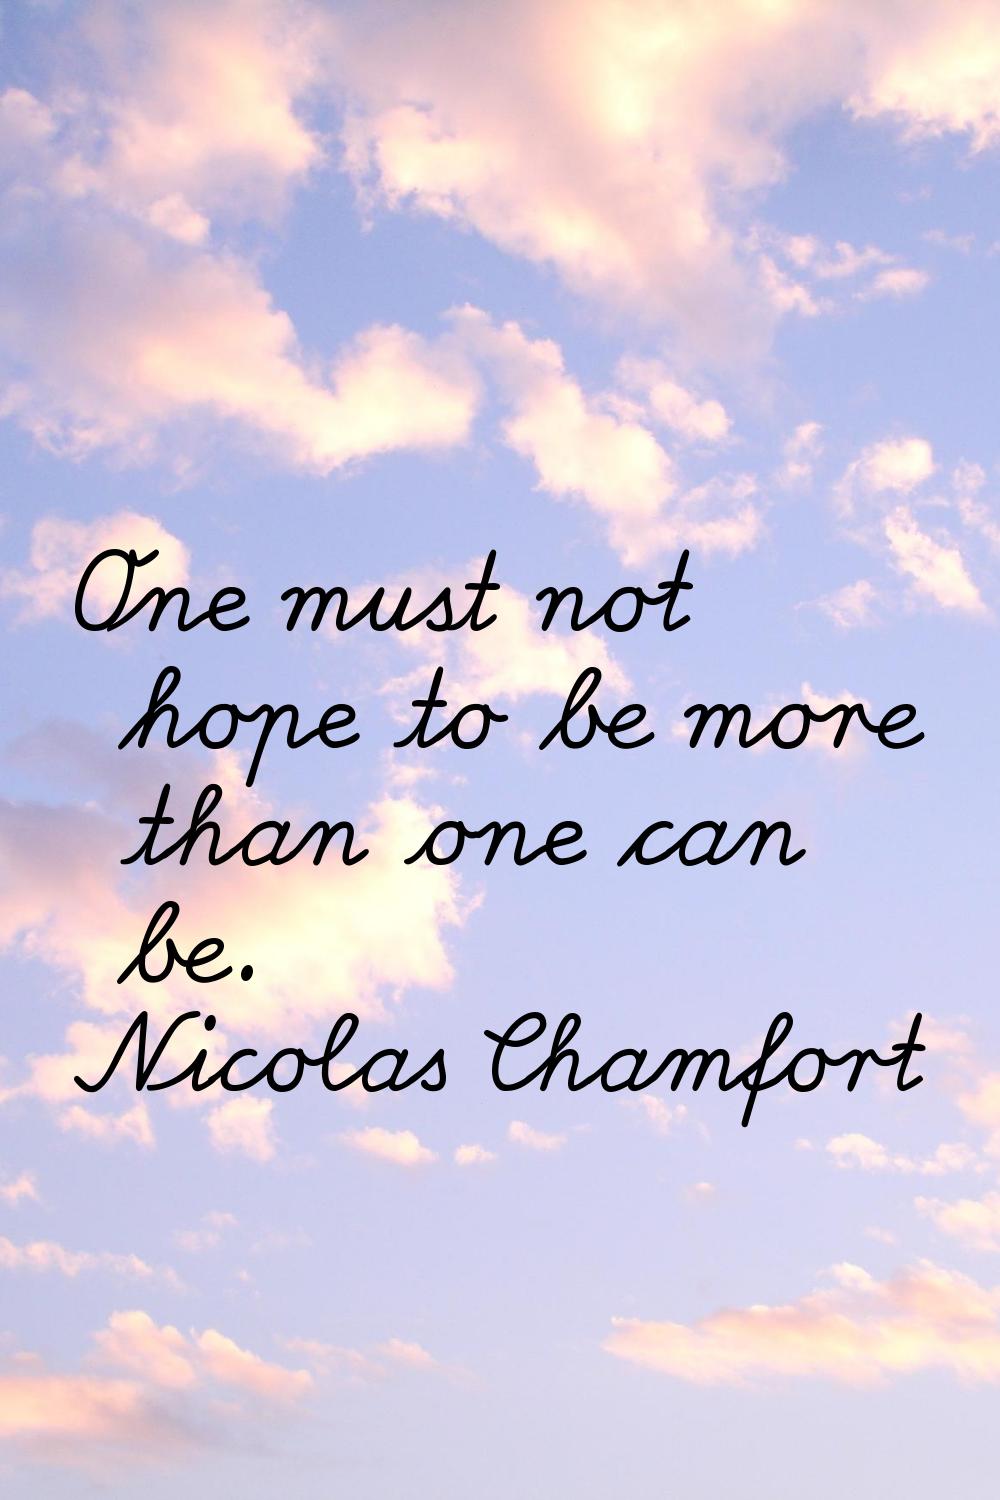 One must not hope to be more than one can be.